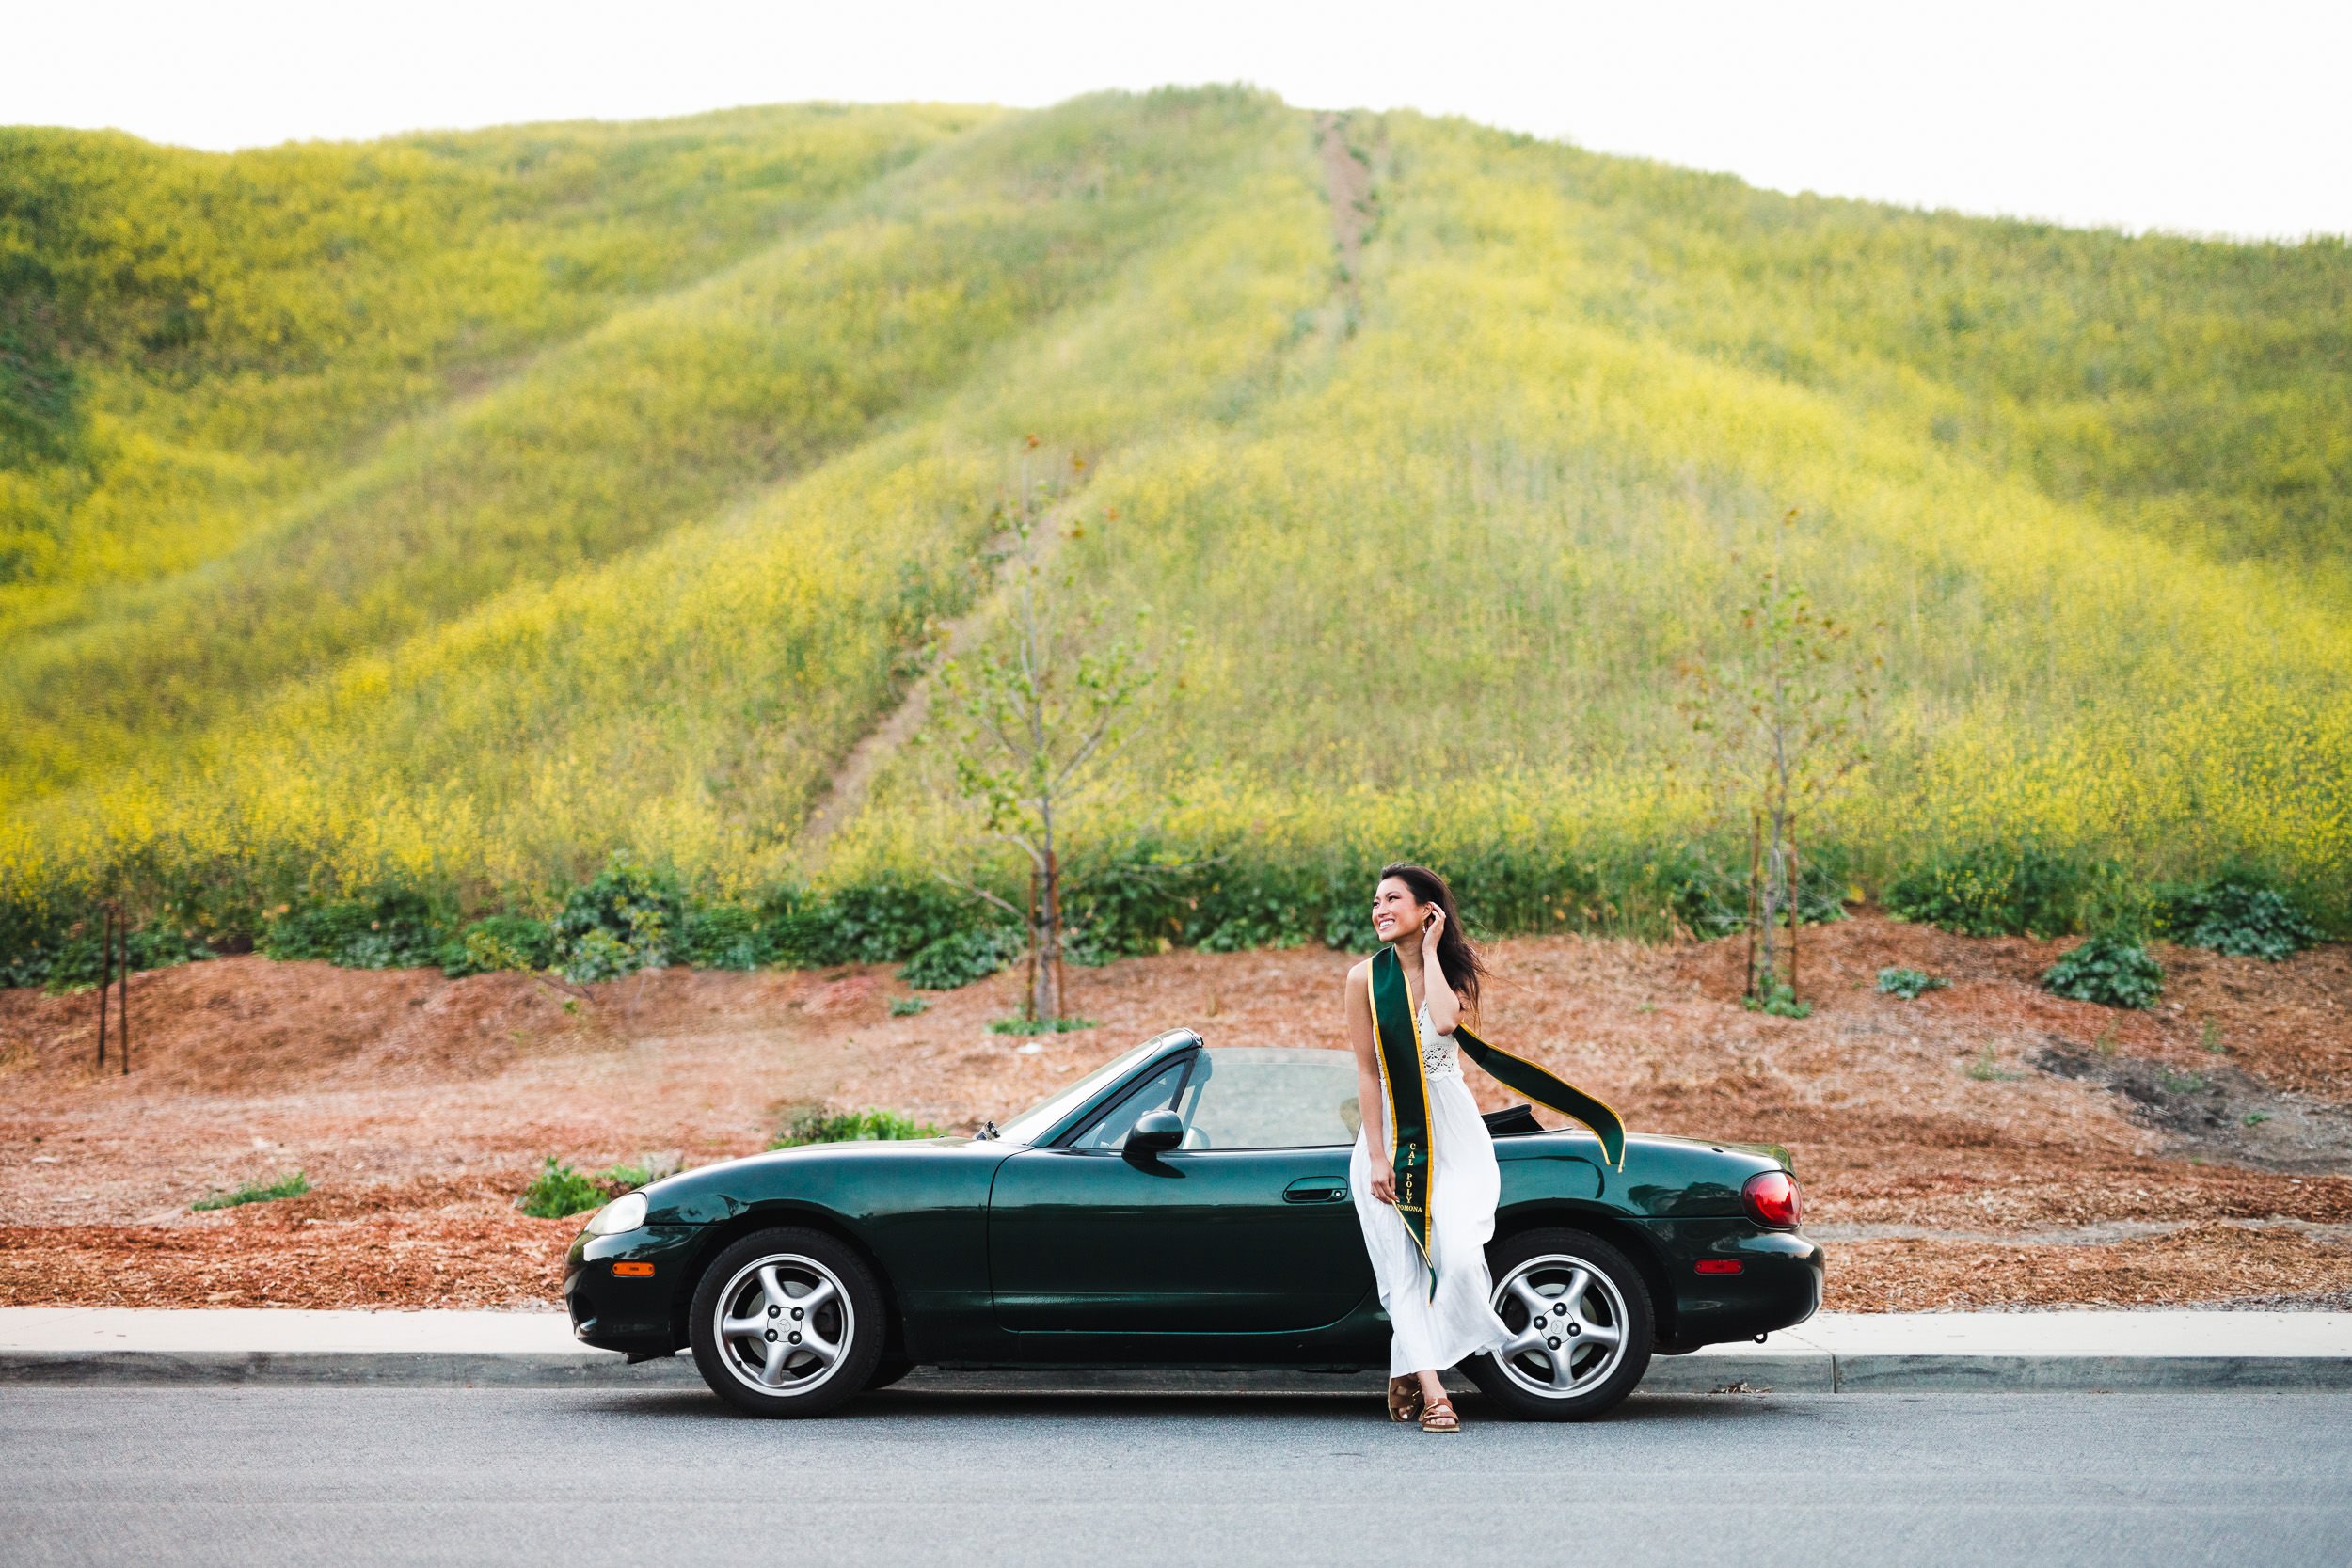 Epic Los Angeles Graduation Portraits of graduate with her car, Miata in wildflowers superbloom. Chino Hills State Park